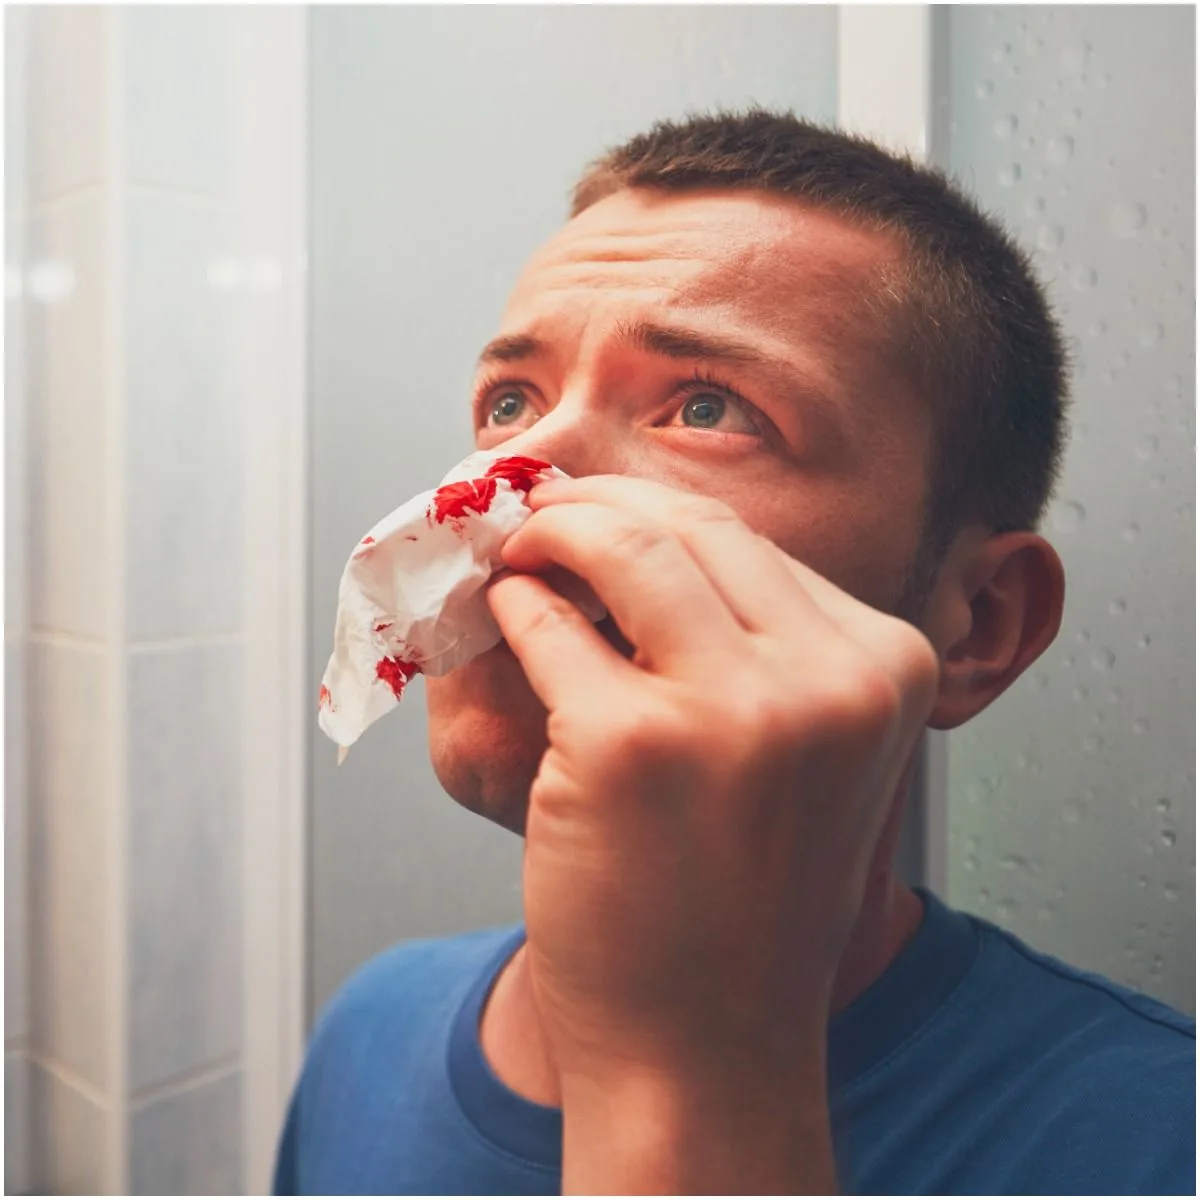 First Aid Management For Nosebleeds